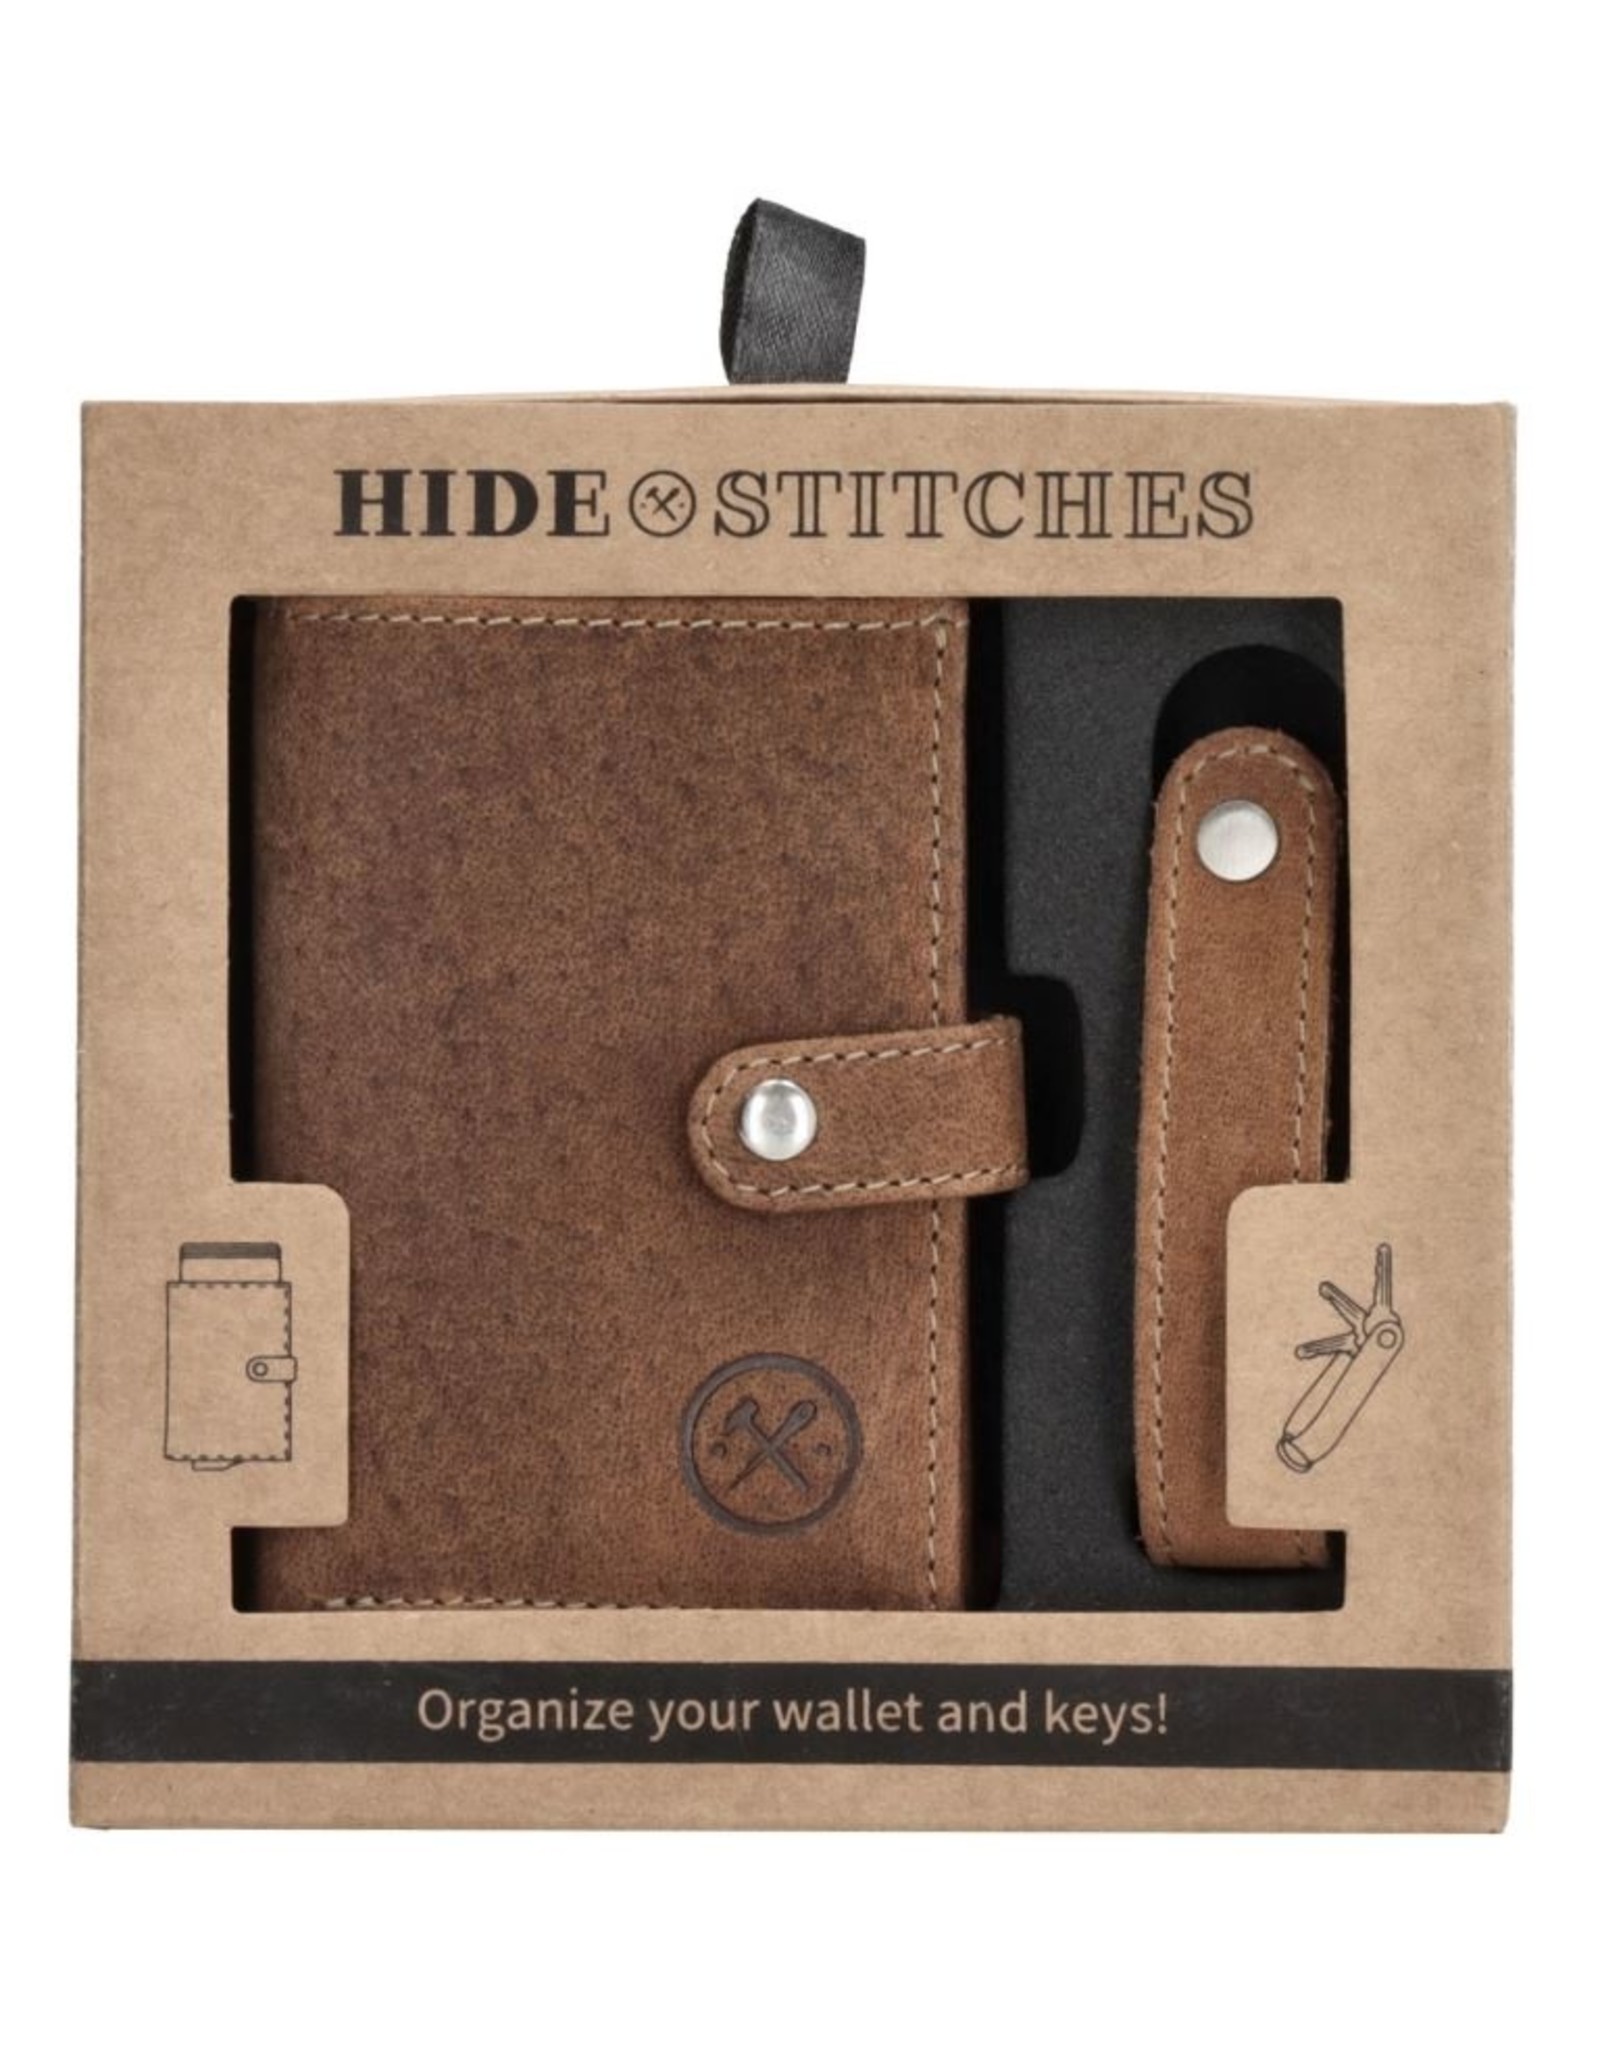 Hide & Stitches Leather Wallets - Hide & Stitches Safety Wallet & Key Ring Set